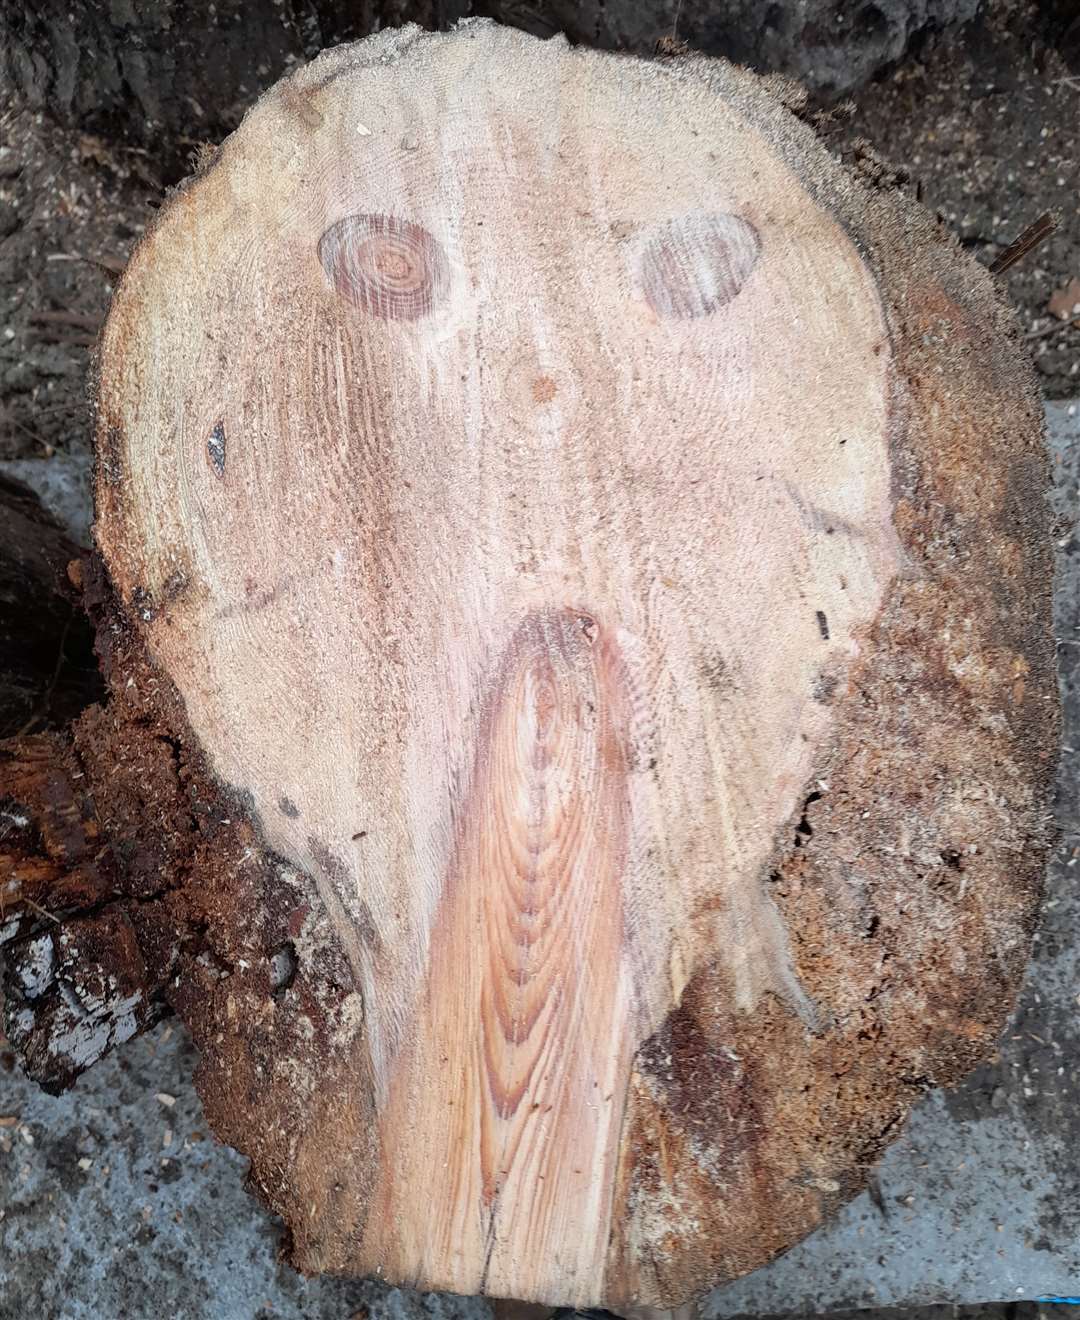 The volunteers found this incarnation of Edvard Munch's The Scream while chopping logs at The Big Cat Sanctuary. Picture: Ian Suitters